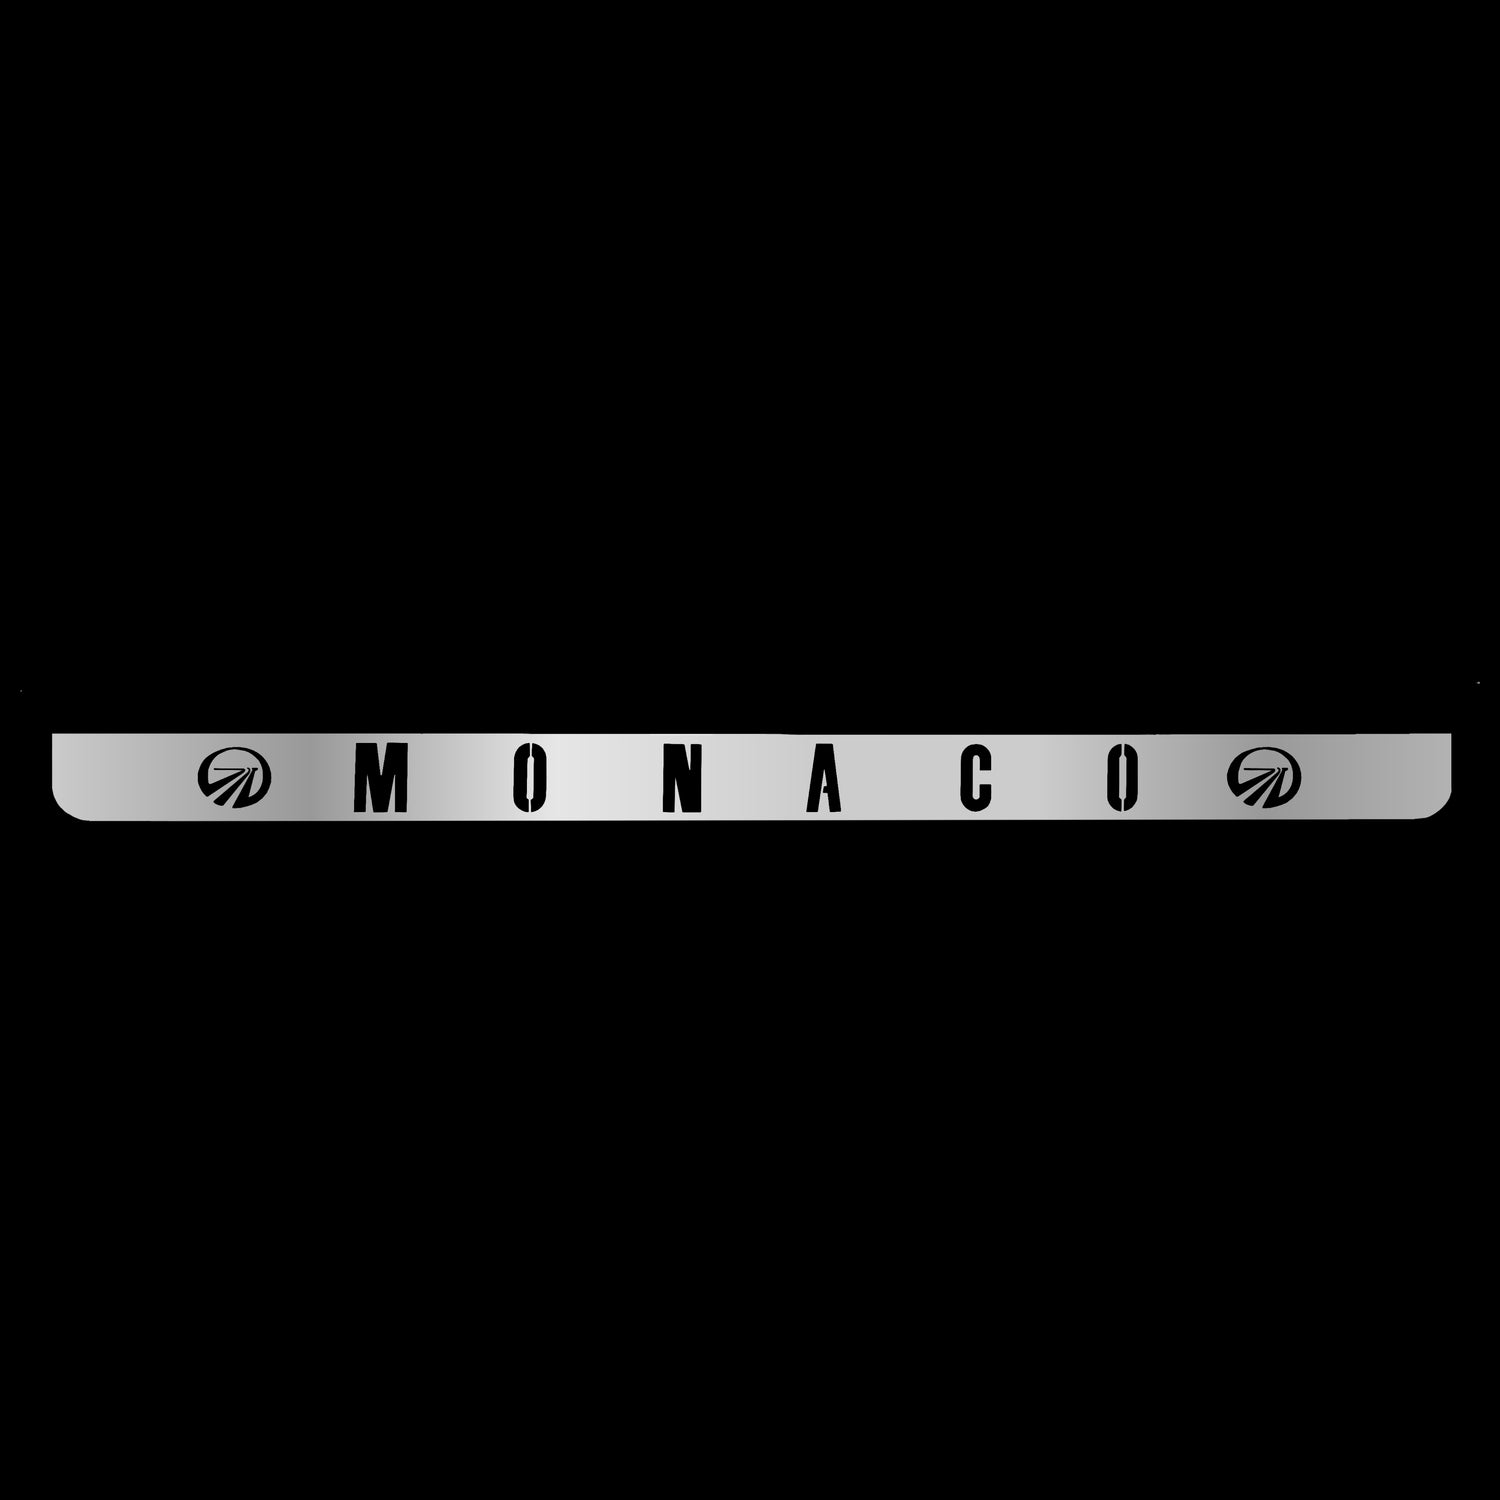 Future-Sales-Monaco-Face-Plate-stainless-steel-mirror-finish-Height-6-Width-94-backer-plate-SSMO-01S